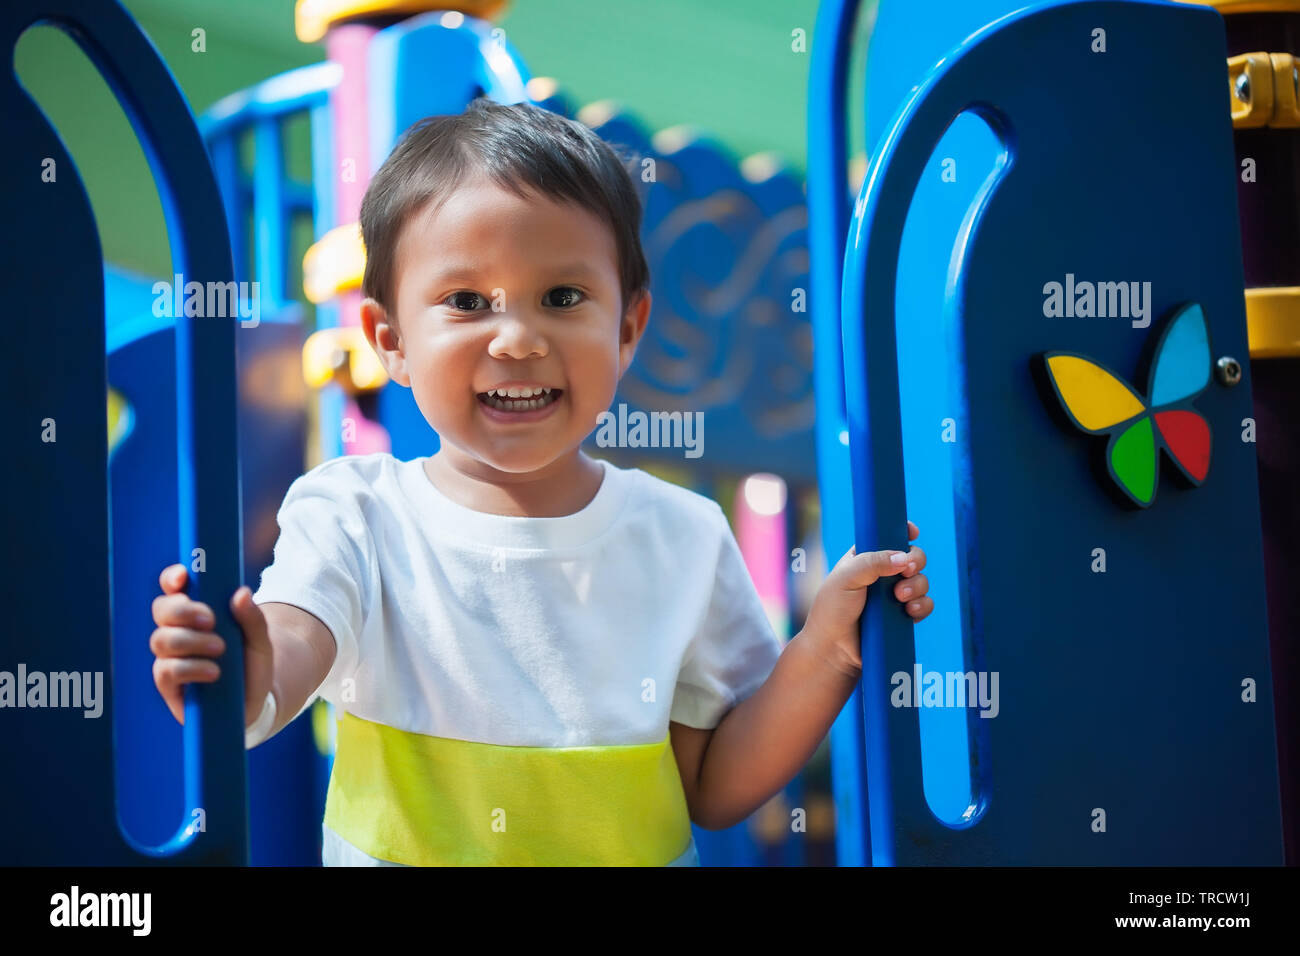 Smiling young boy holding on from a kids playground jungle gym with an excited look and ready to have fun. Stock Photo